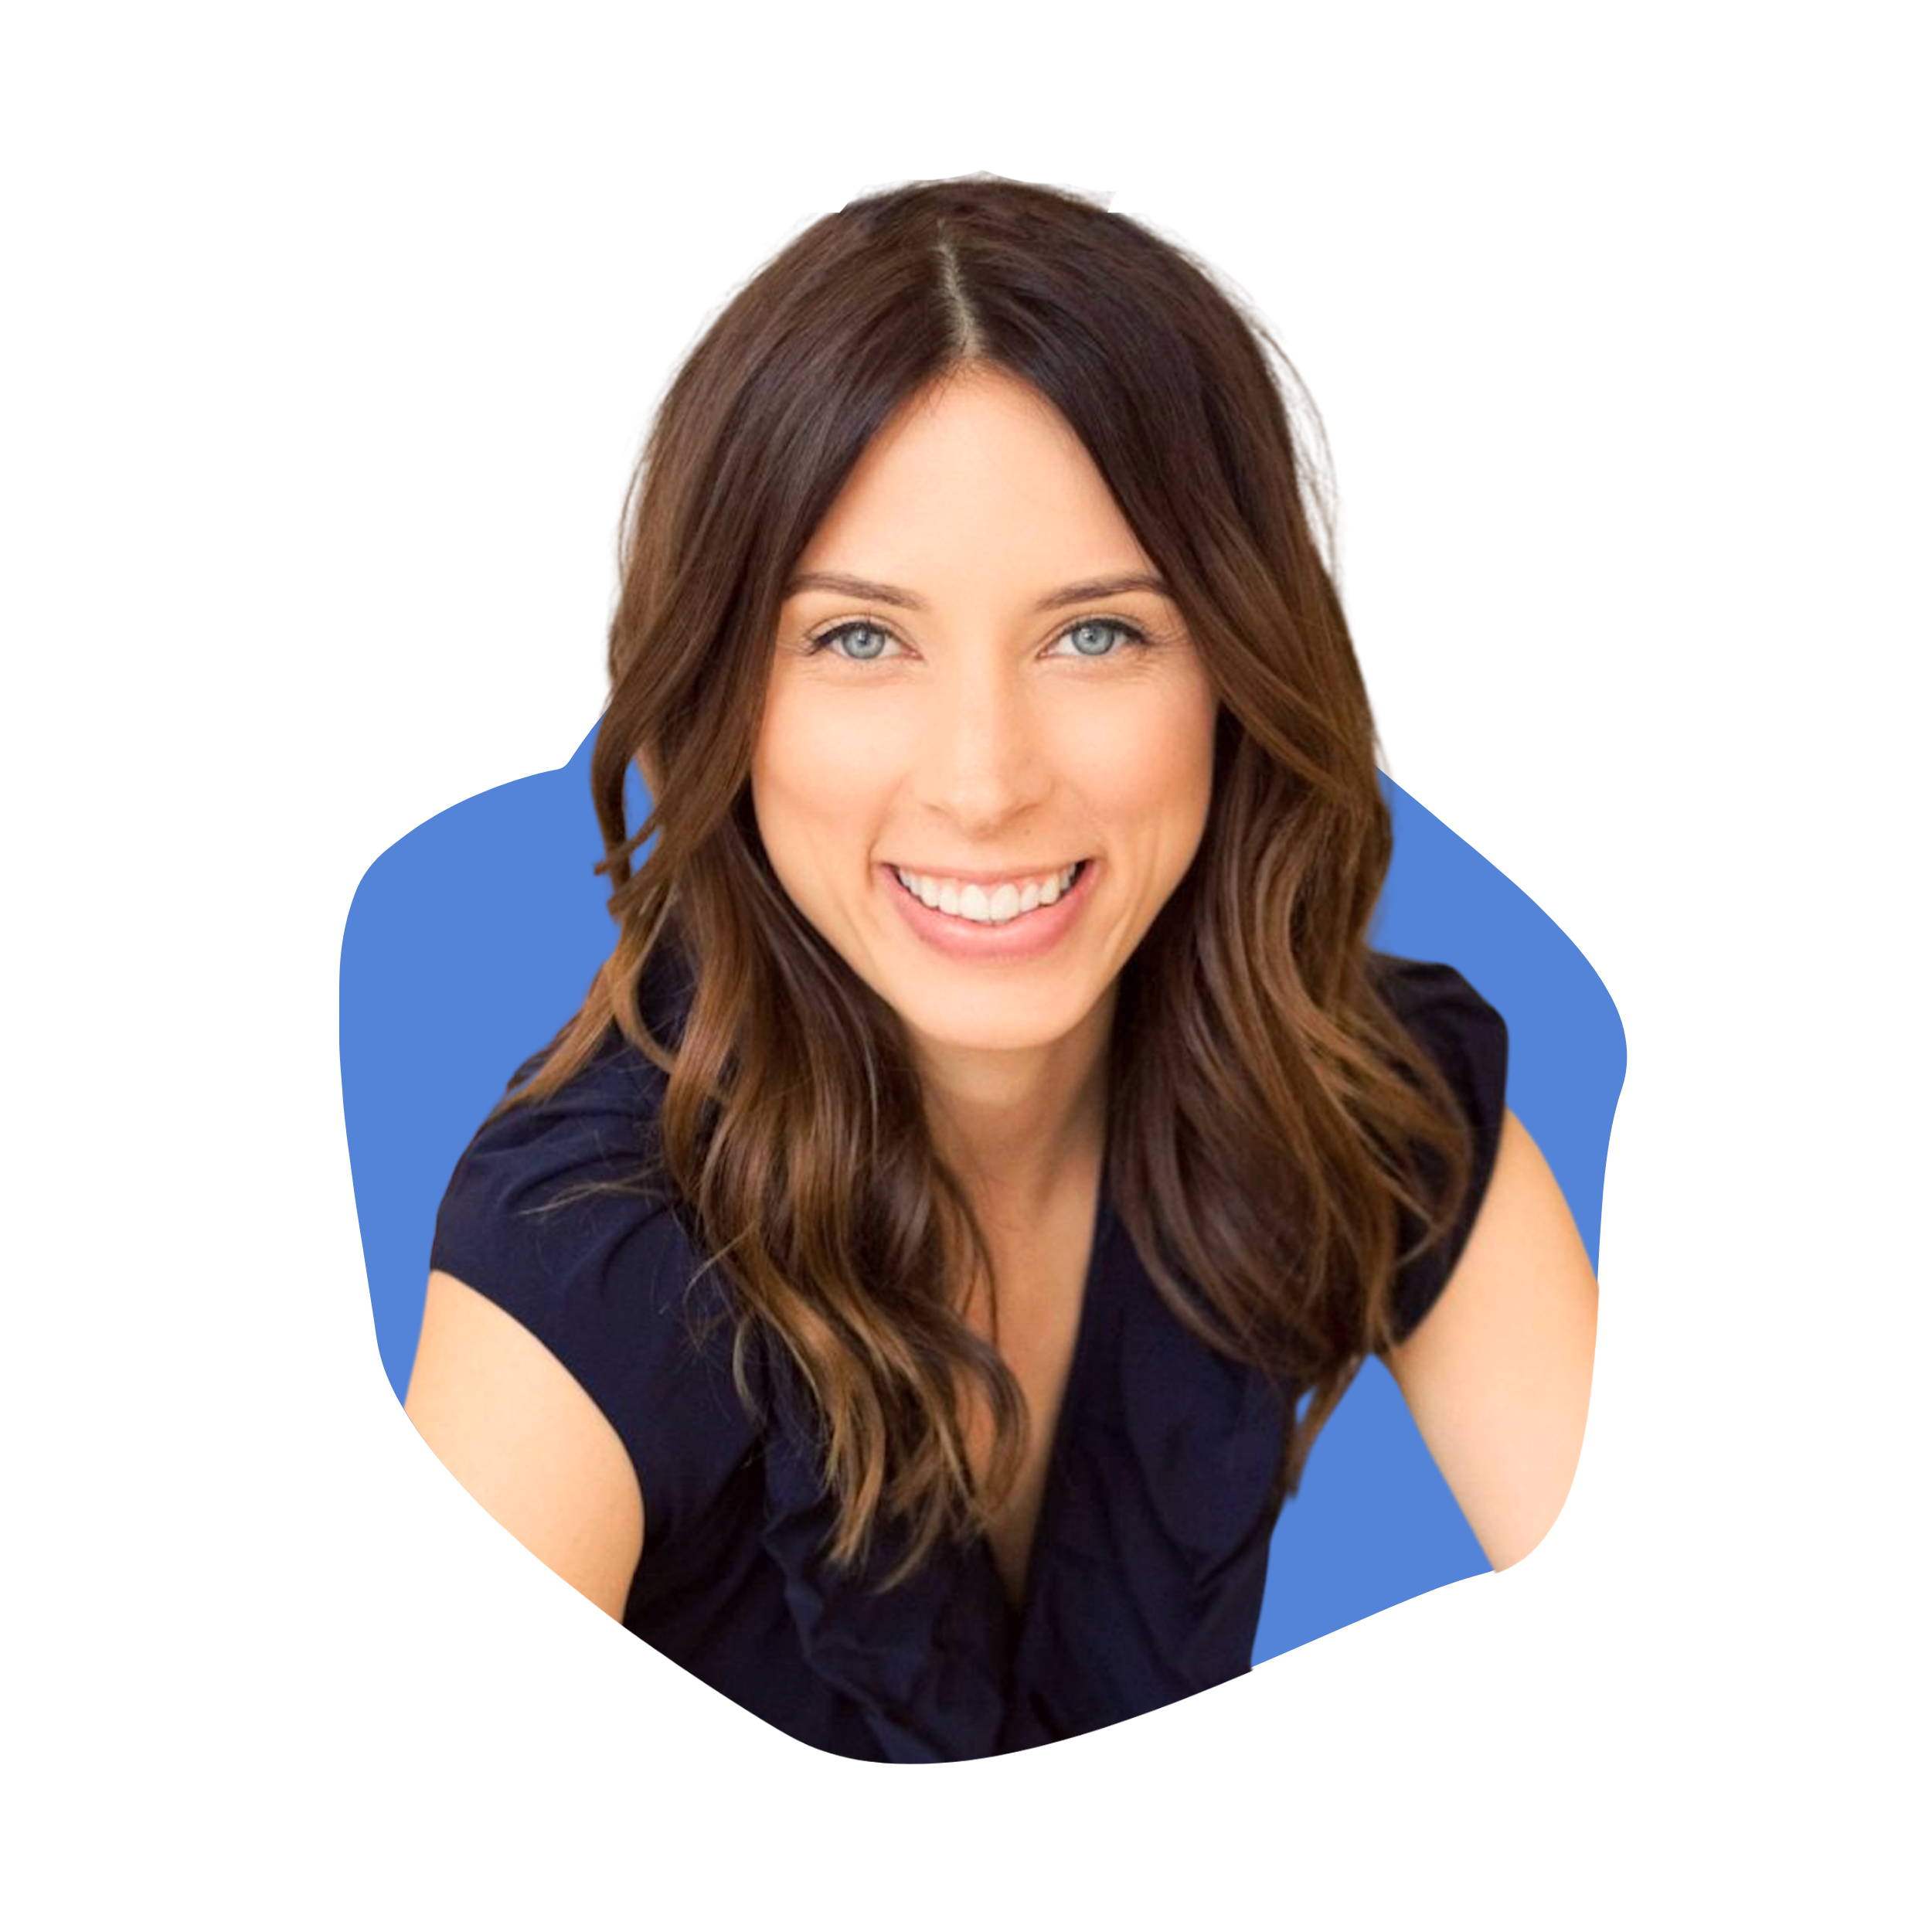 Sarah Gibson Tuttle - Founder and CEO of Olive & June — The